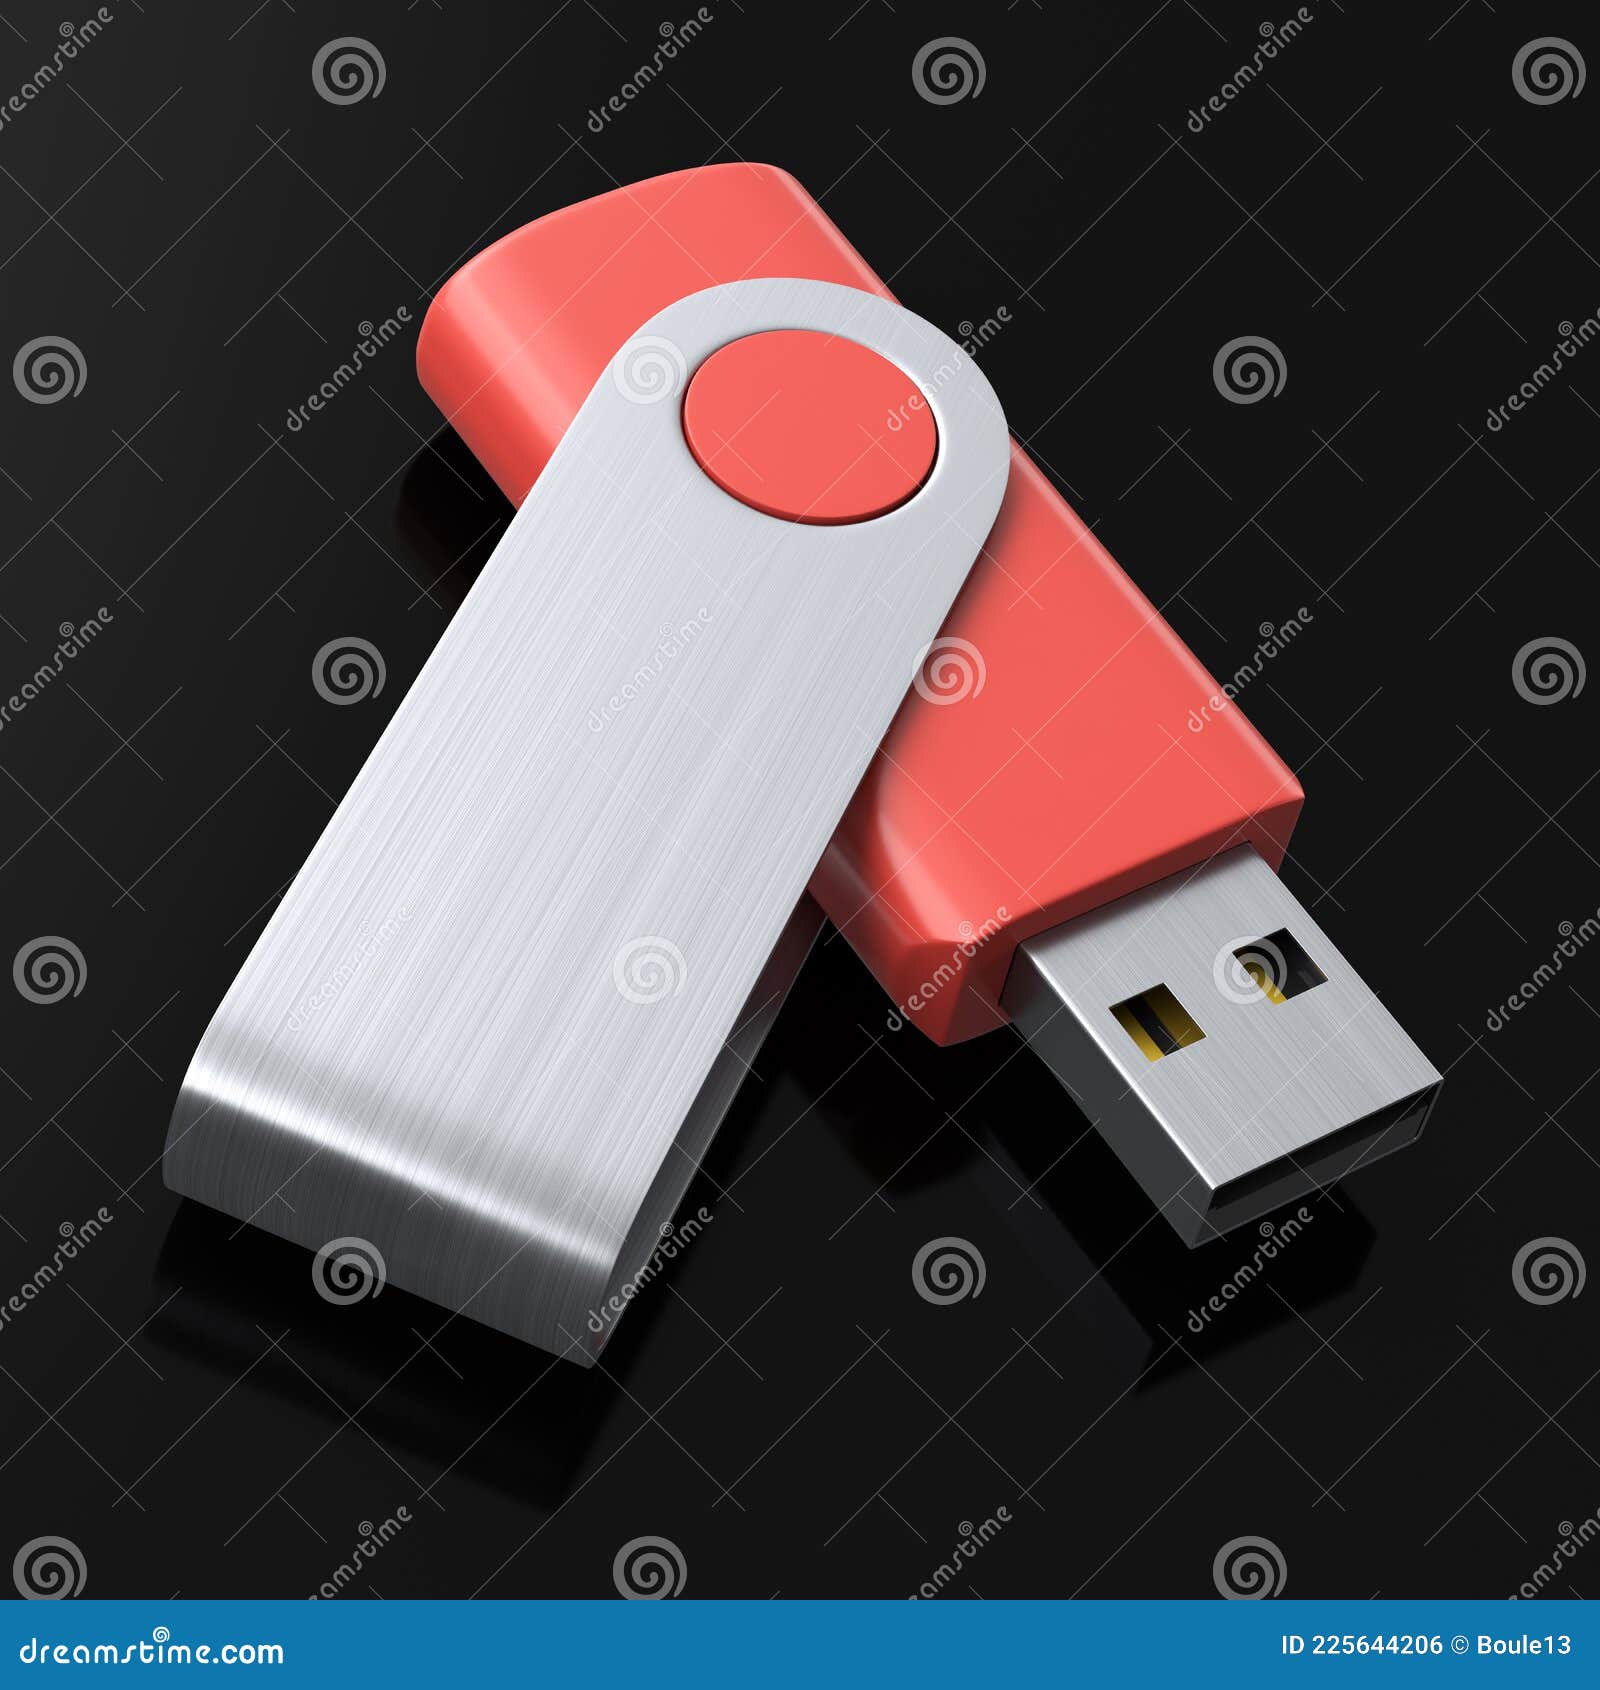 Portable Red USB Flash Drive Stick for Workspace Isolated on Black Background Stock Illustration - Illustration flash, information: 225644206